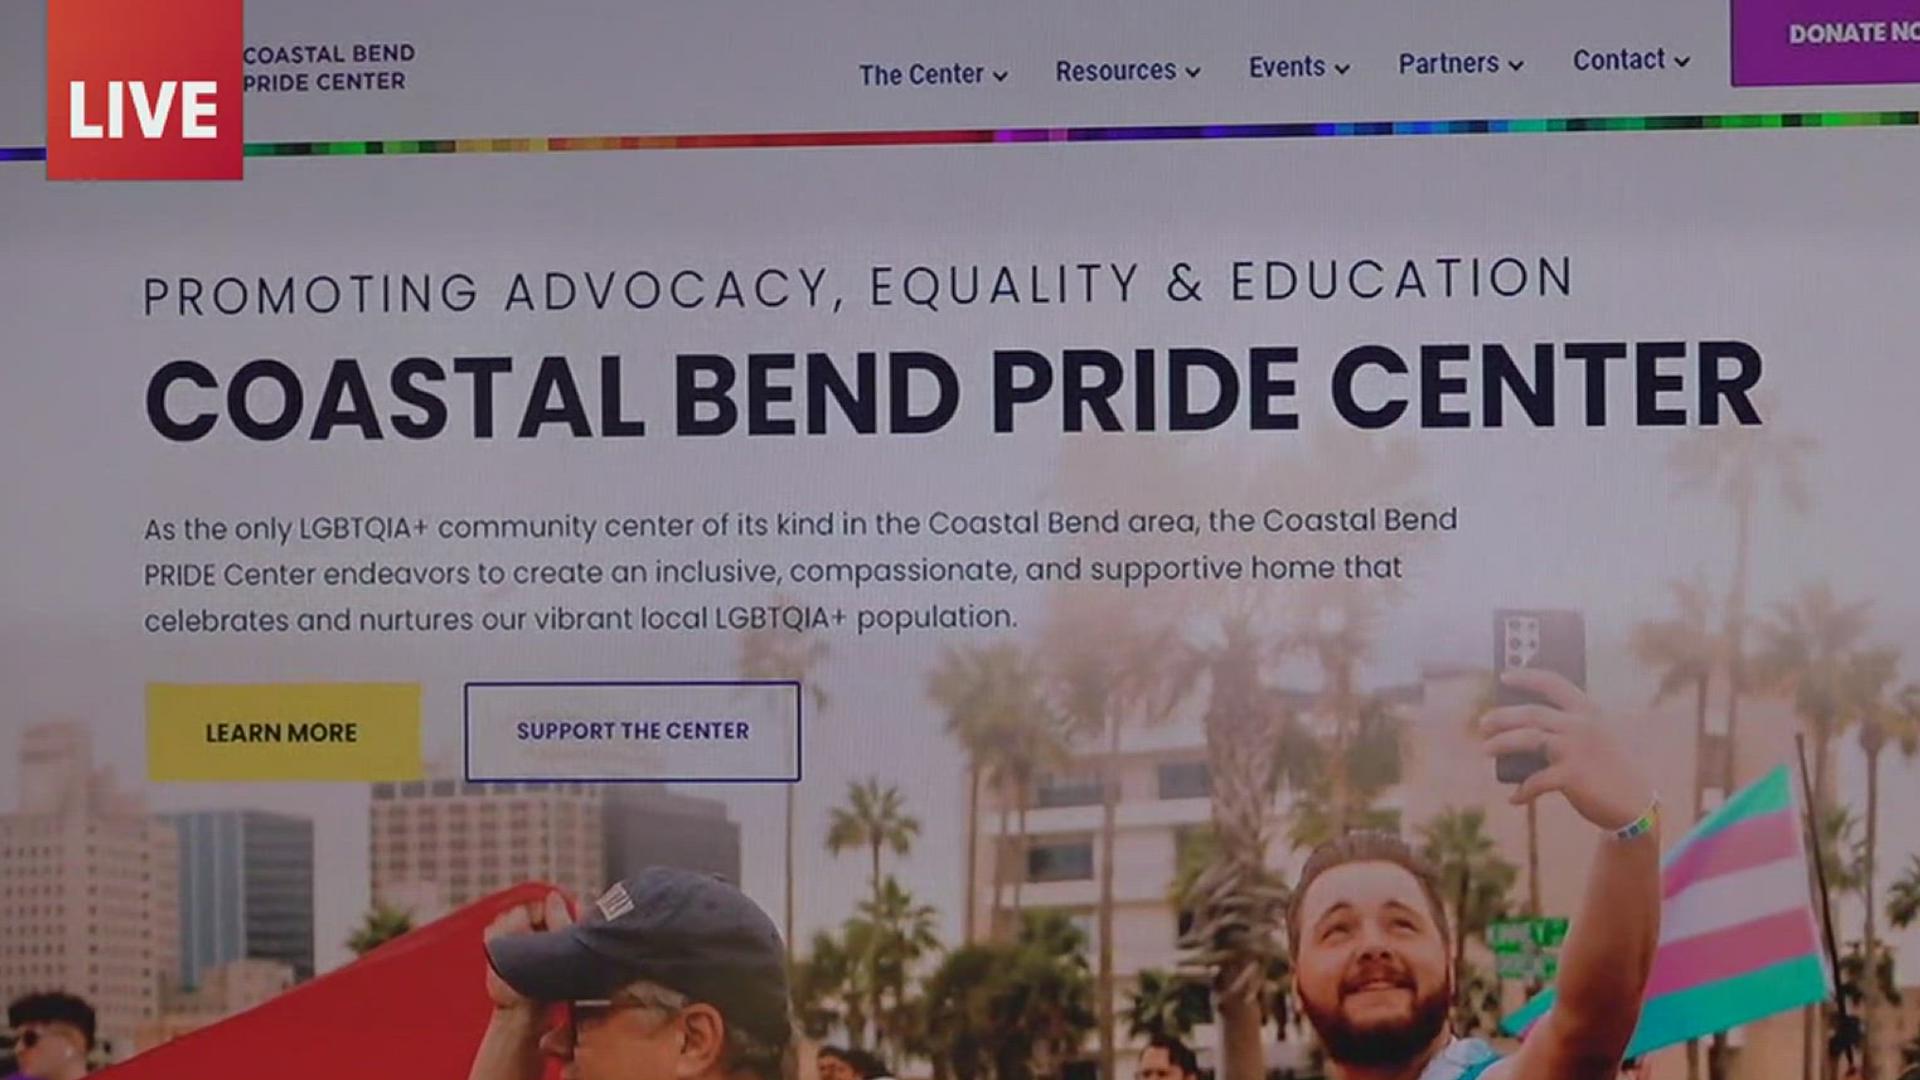 Robert Kymes, director of the Coastal Bend Pride Center says that talked with us about how Gay Pride Day and the Stonewall riots developed into today's Pride month.